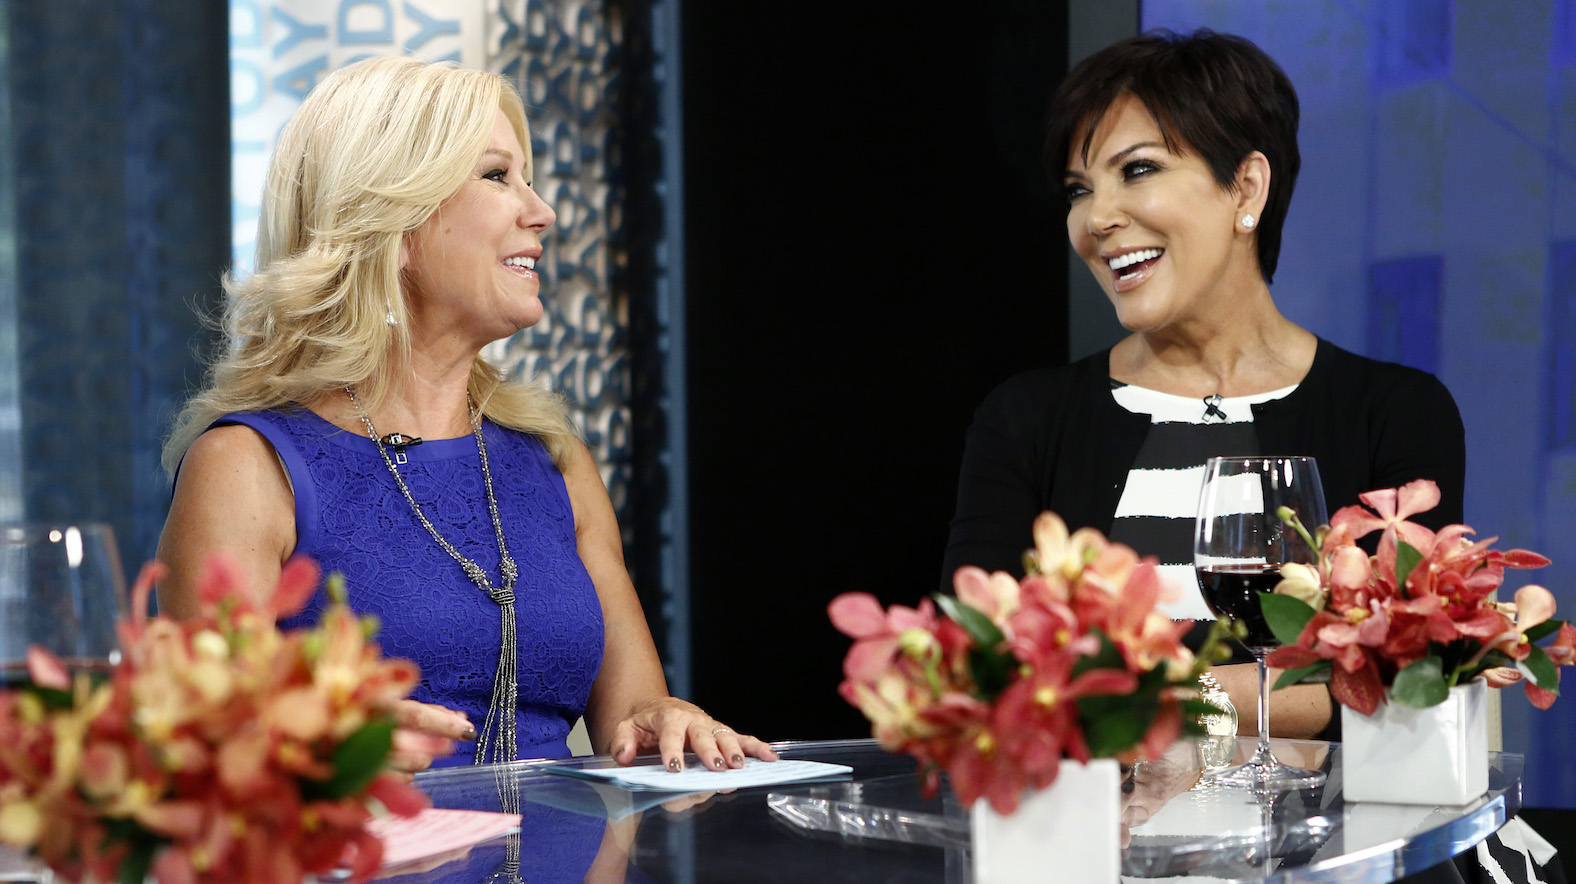 Kathie Lee Gifford Hairy Pussy - Kathie Lee Gifford 'Loaned Kris Jenner Money' and Wants It Back